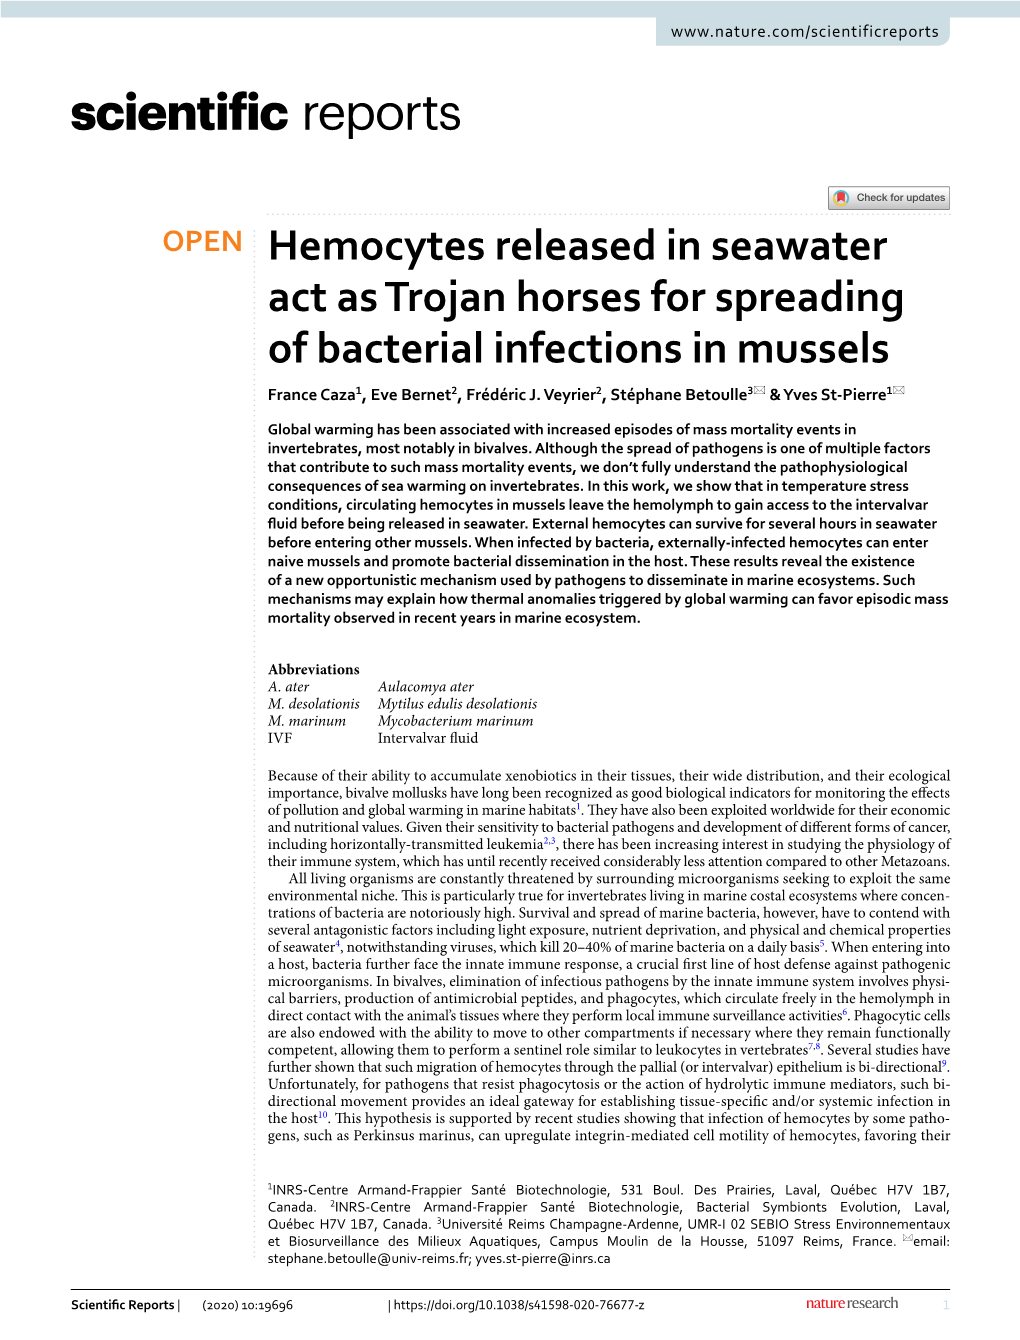 Hemocytes Released in Seawater Act As Trojan Horses for Spreading of Bacterial Infections in Mussels France Caza1, Eve Bernet2, Frédéric J